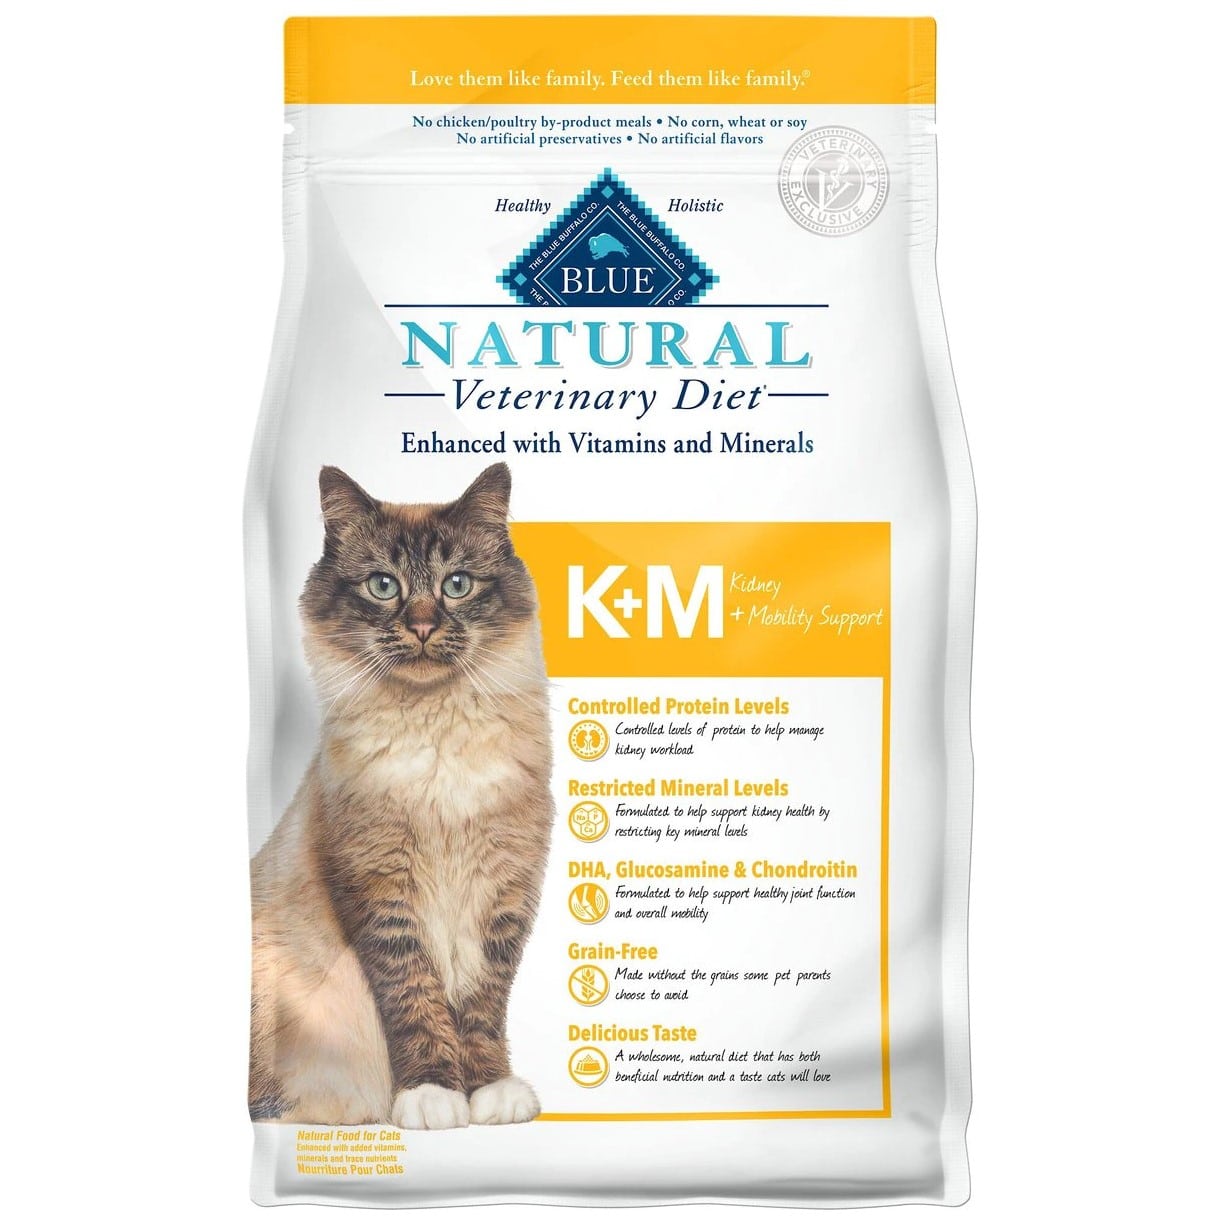 Blue Buffalo Natural Veterinary Diet K+M Kidney + Mobility Support Grain-Free Dry Cat Food